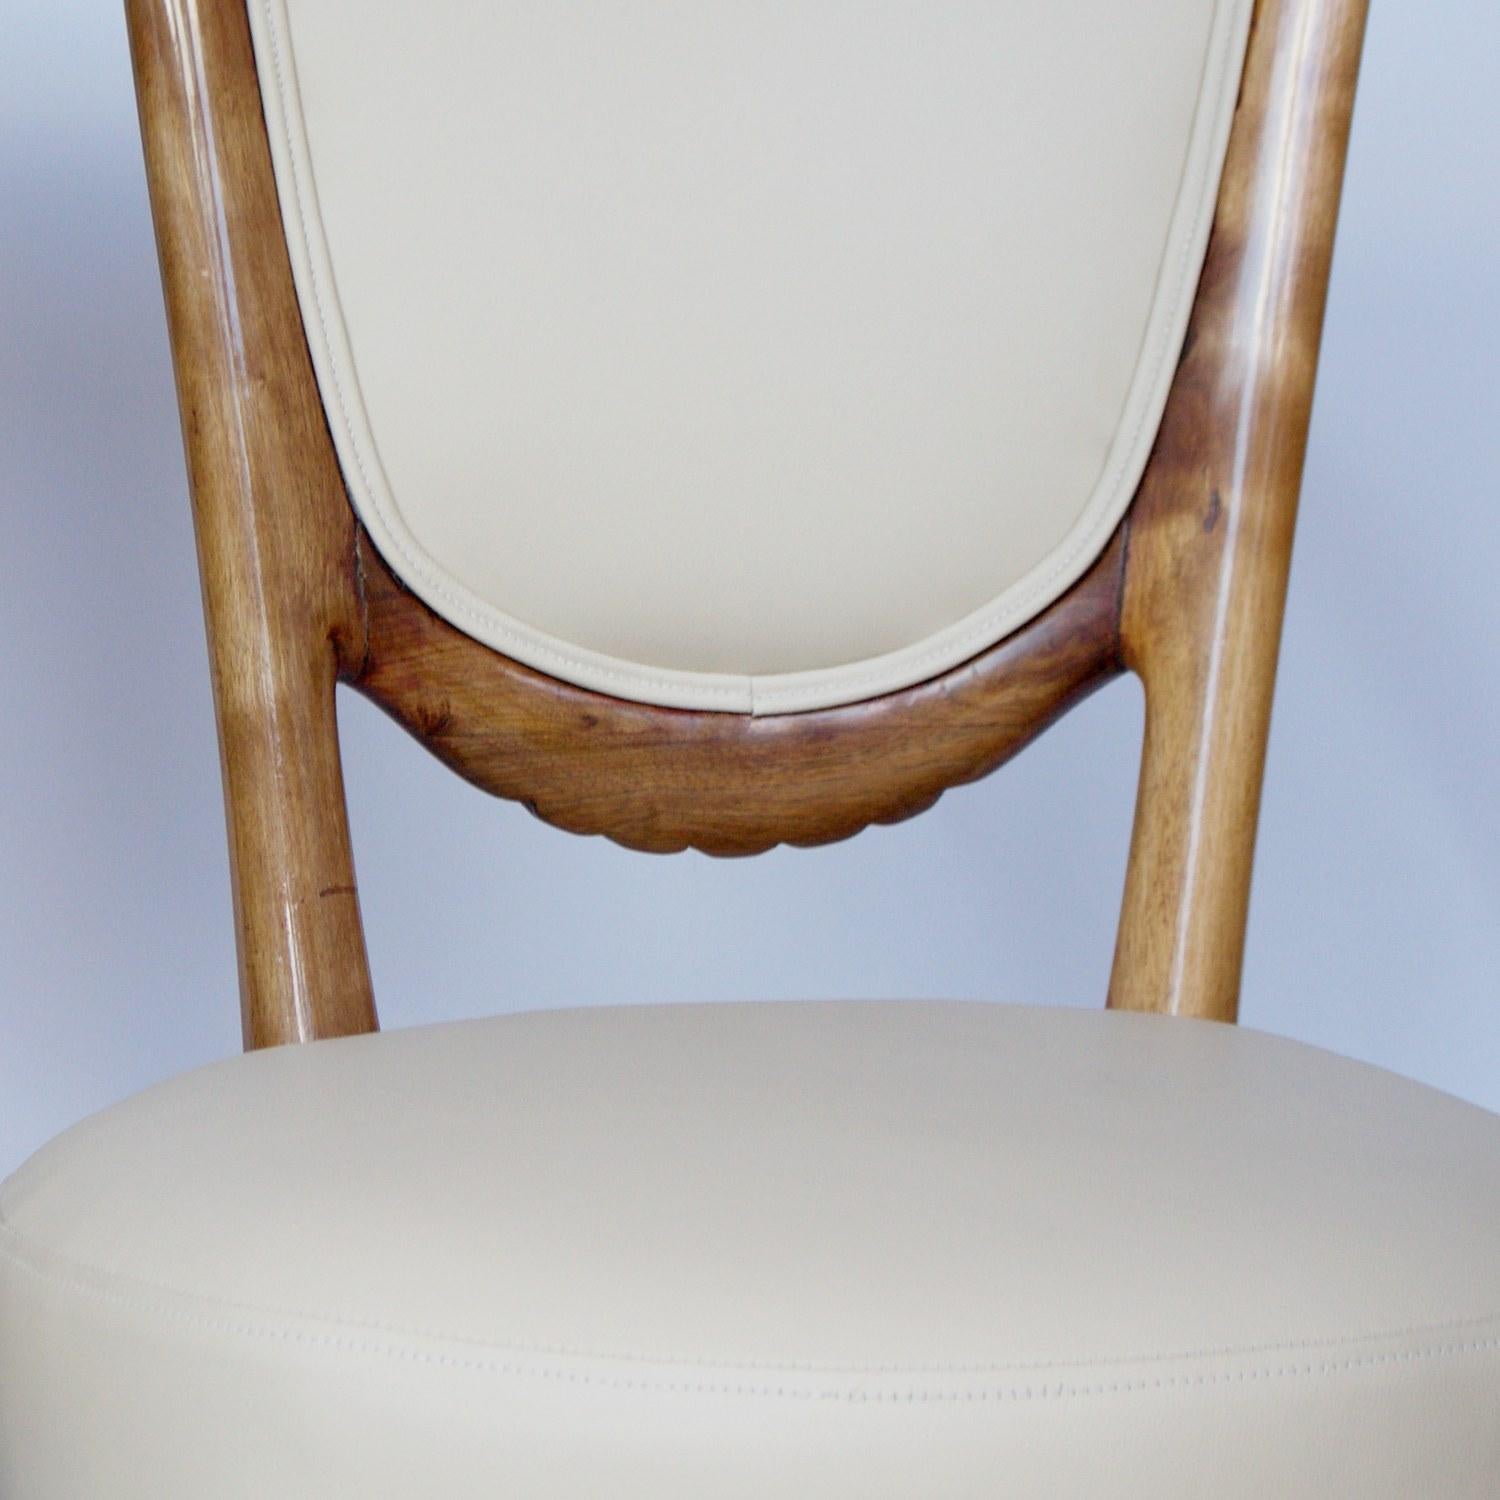 20th Century 8 Solid Walnut Italian Art Deco Dining Chairs Upholstered in Cream Leather